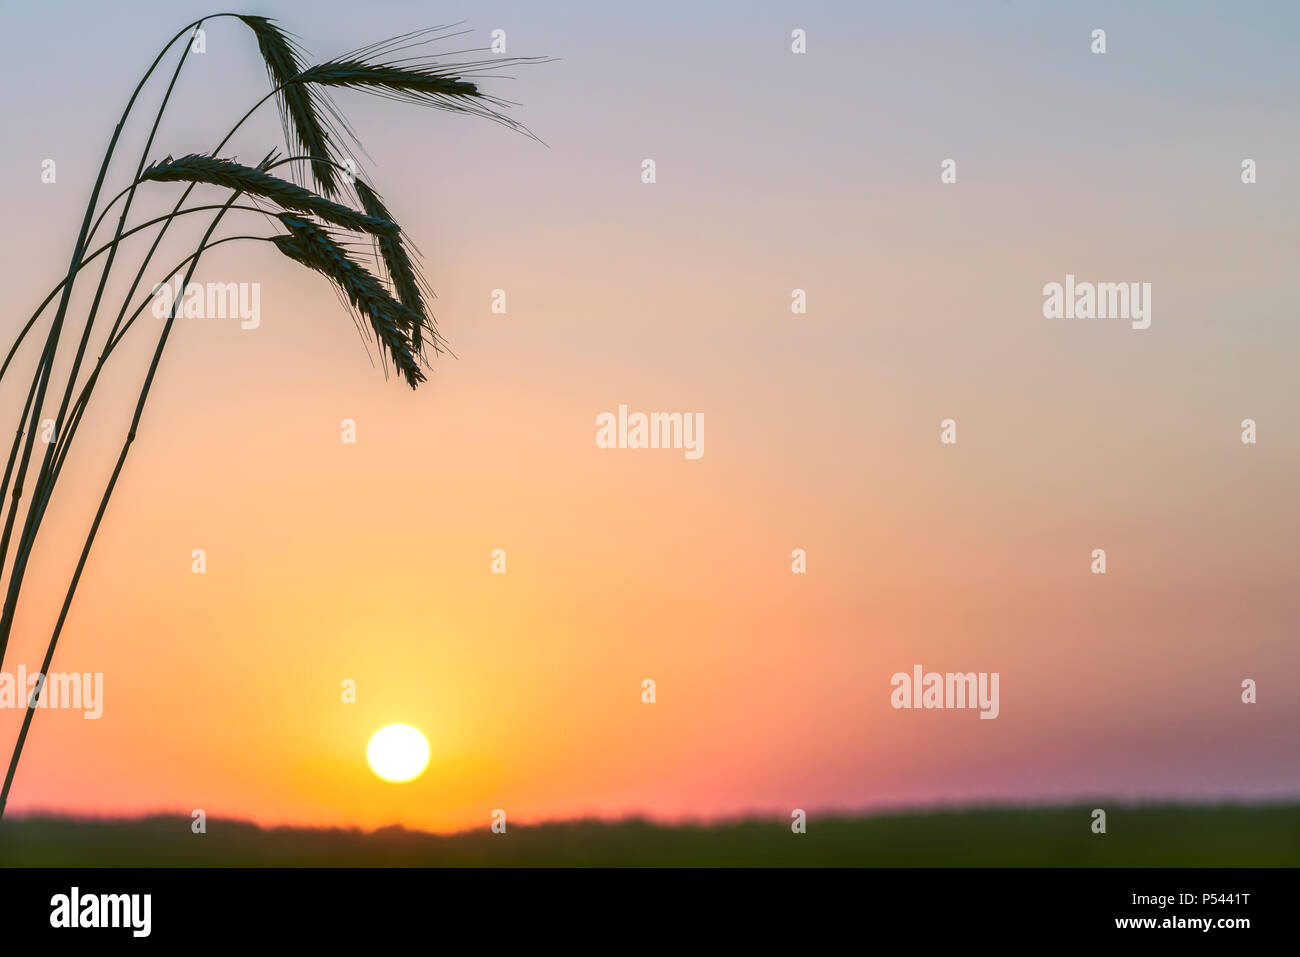 Spikelets of wheat against the background of dawn in the field. Stock Photo